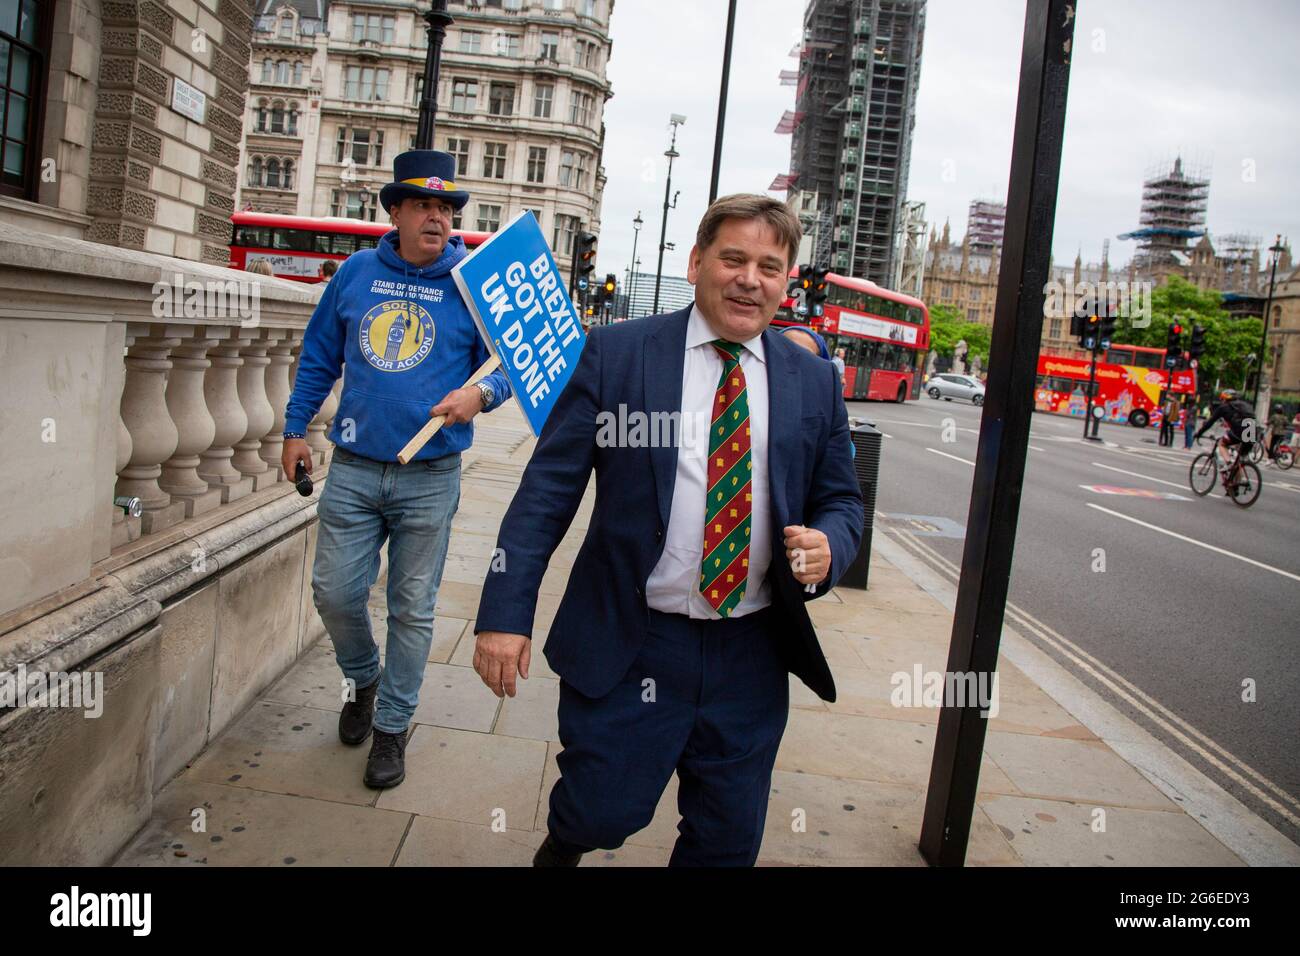 Steve Bray, Anti Brexit Protester following Andrew Bridgen, MP for North West Leicester in Whitehall, London, UK, 5,7,2021 Stock Photo